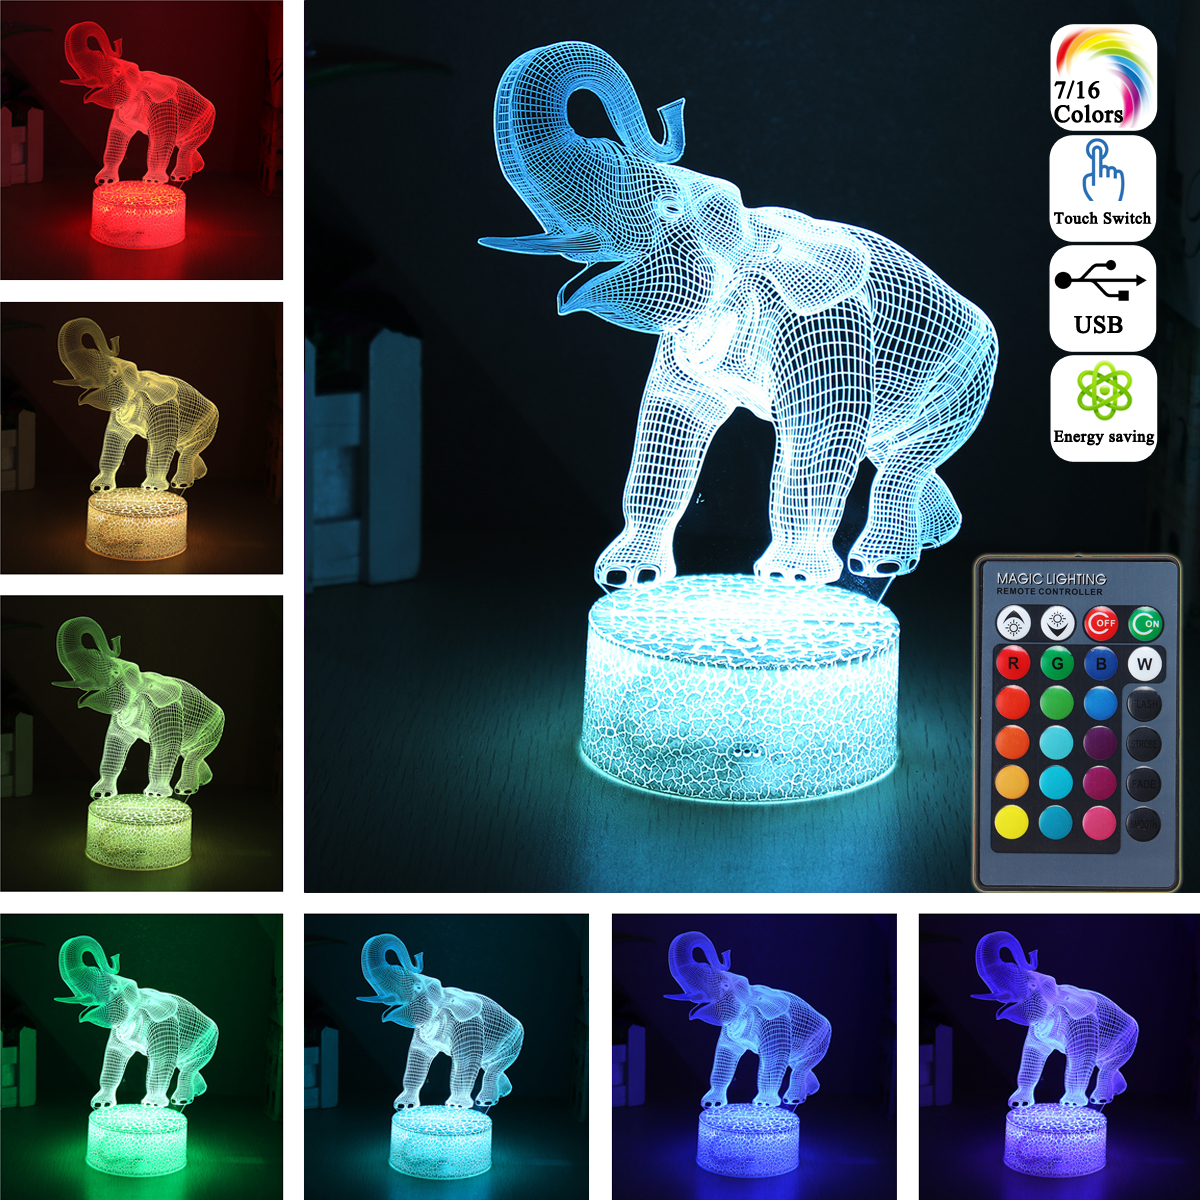 16-Colors-3D-LED-Night-Light-Touch-Switch-Elephant-Table-Bedroom-Lamp-Home-Decor-1370465-2